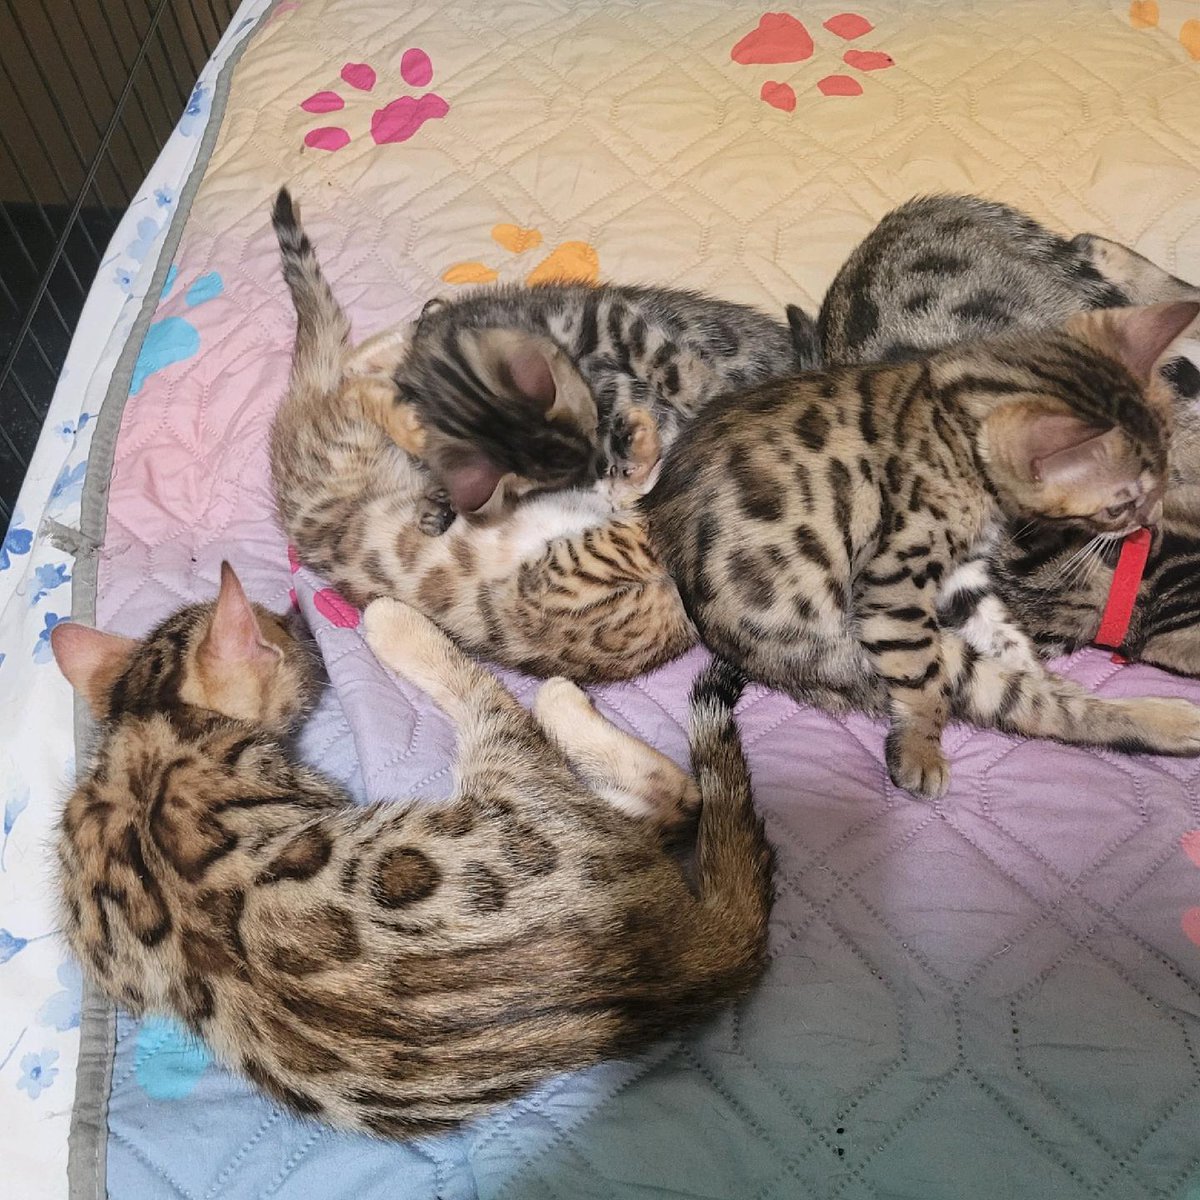 5 beautiful Bengal kittens for sale. If interested DM me. #catlover #Bengals #cats #oplive